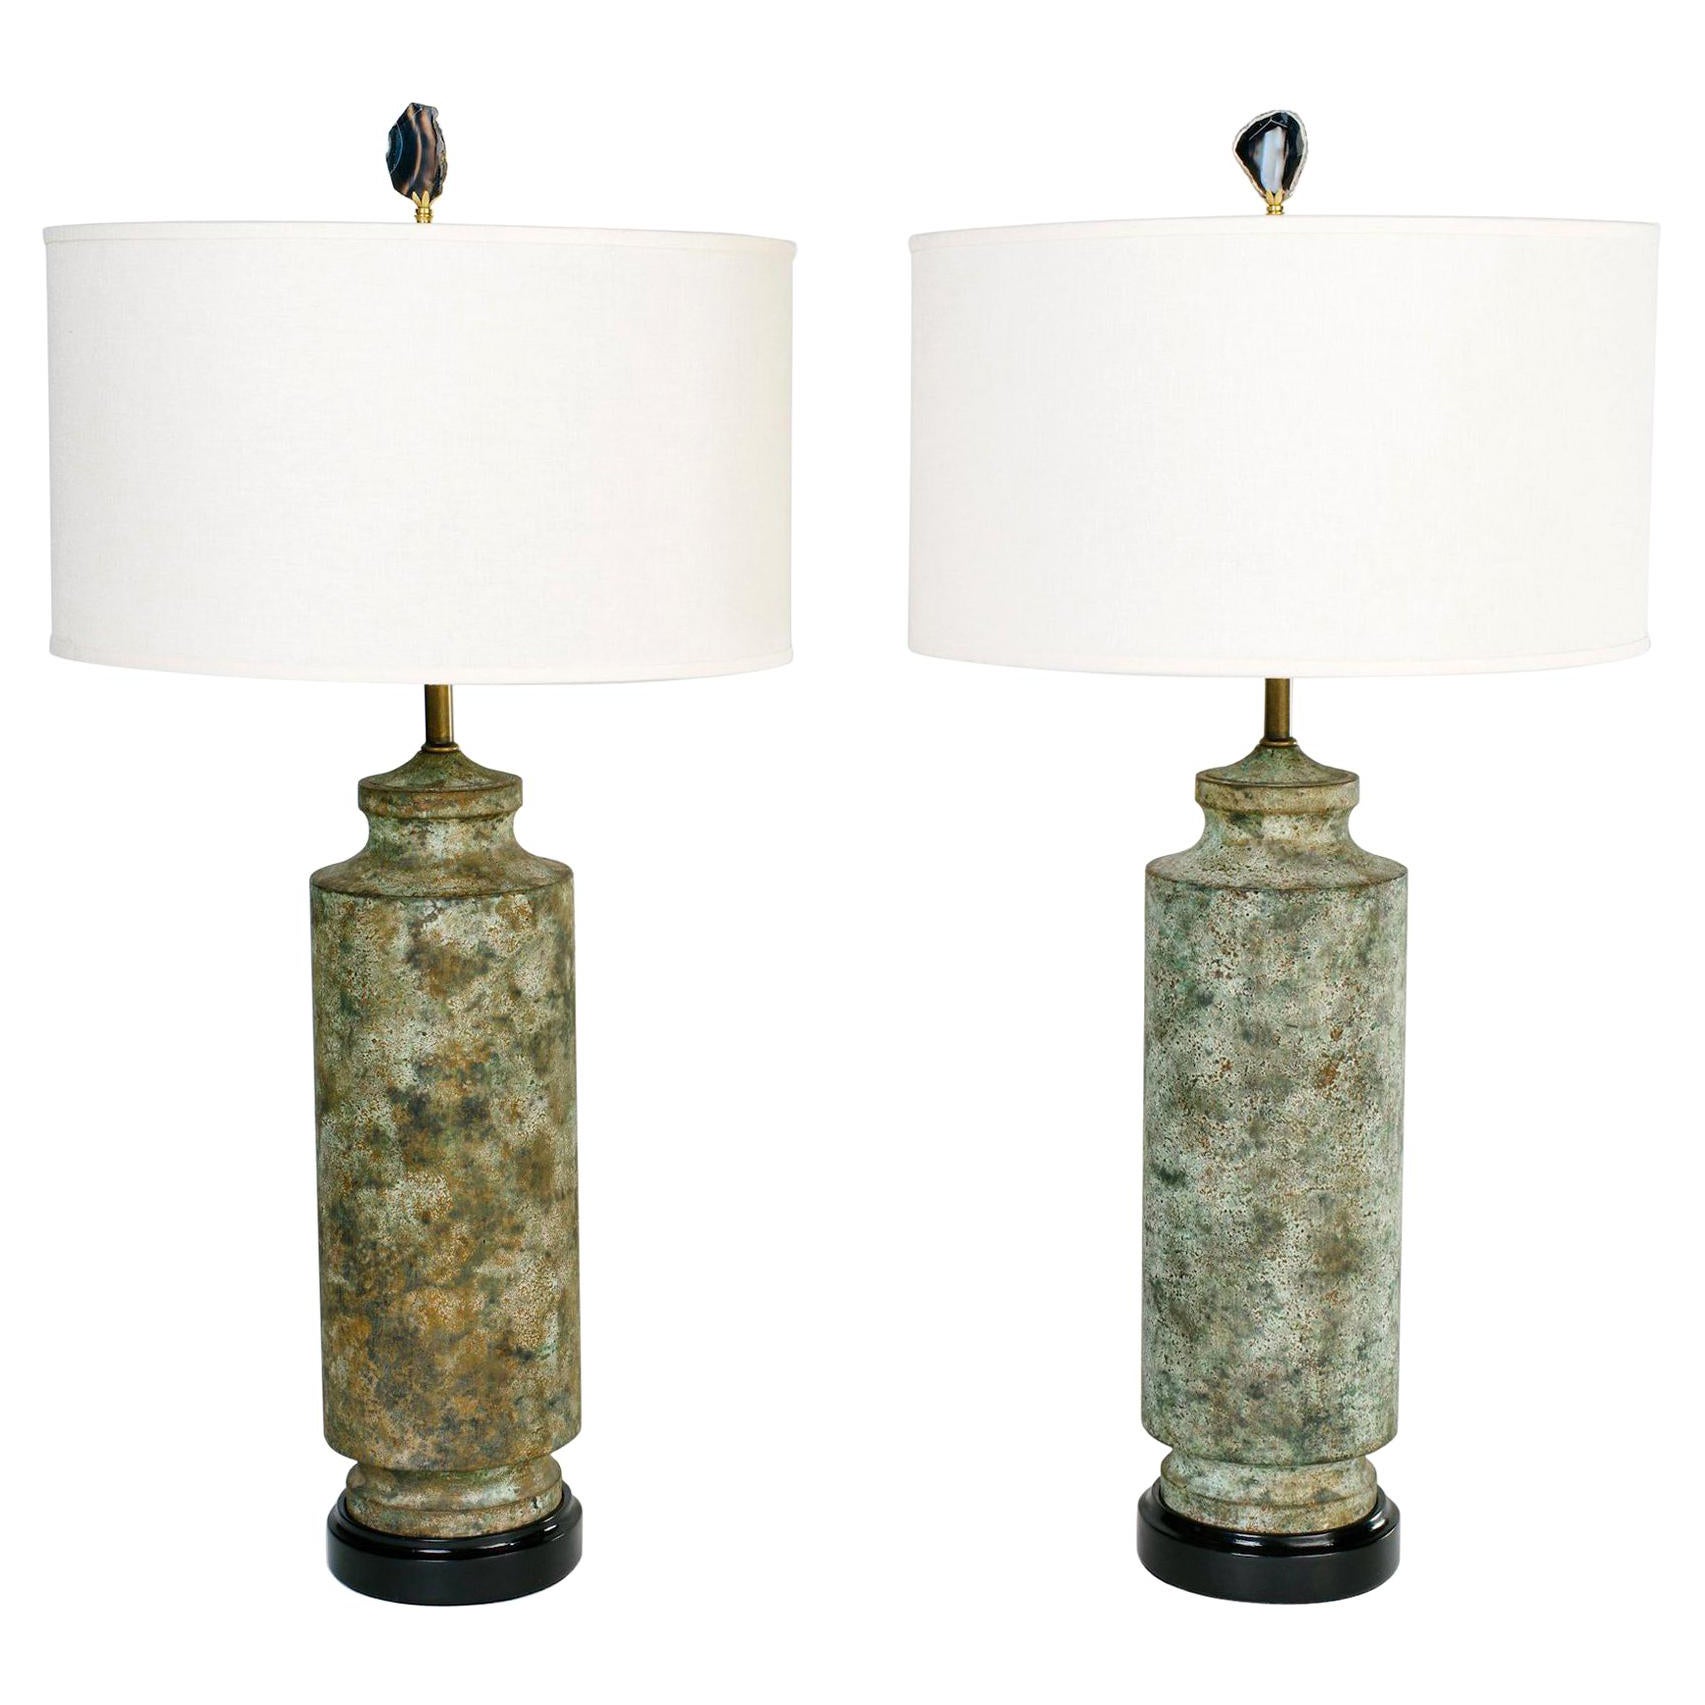 Pair of Mid-Century Modern Pagoda Lamps in Distressed Verdigris Metal, 1960's For Sale